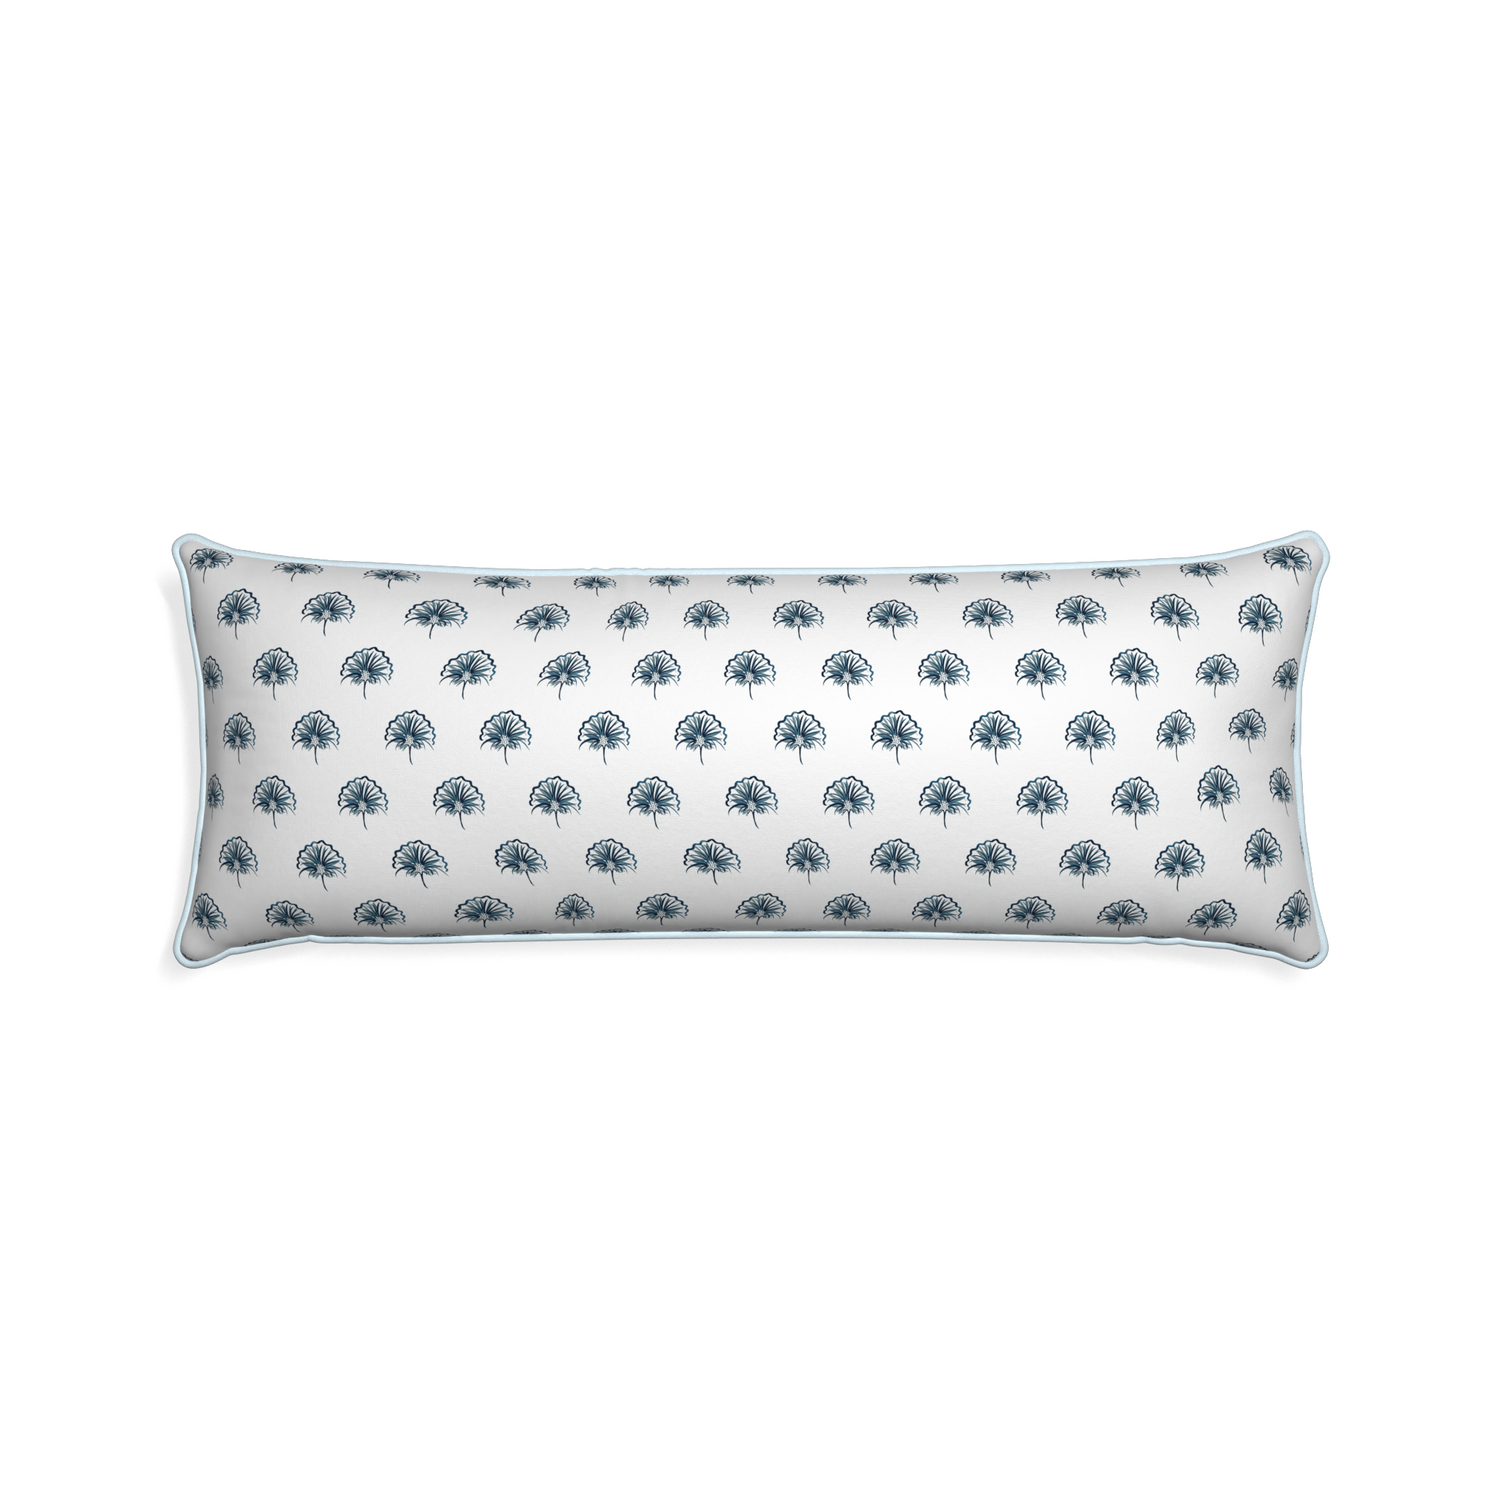 Xl-lumbar penelope midnight custom pillow with powder piping on white background